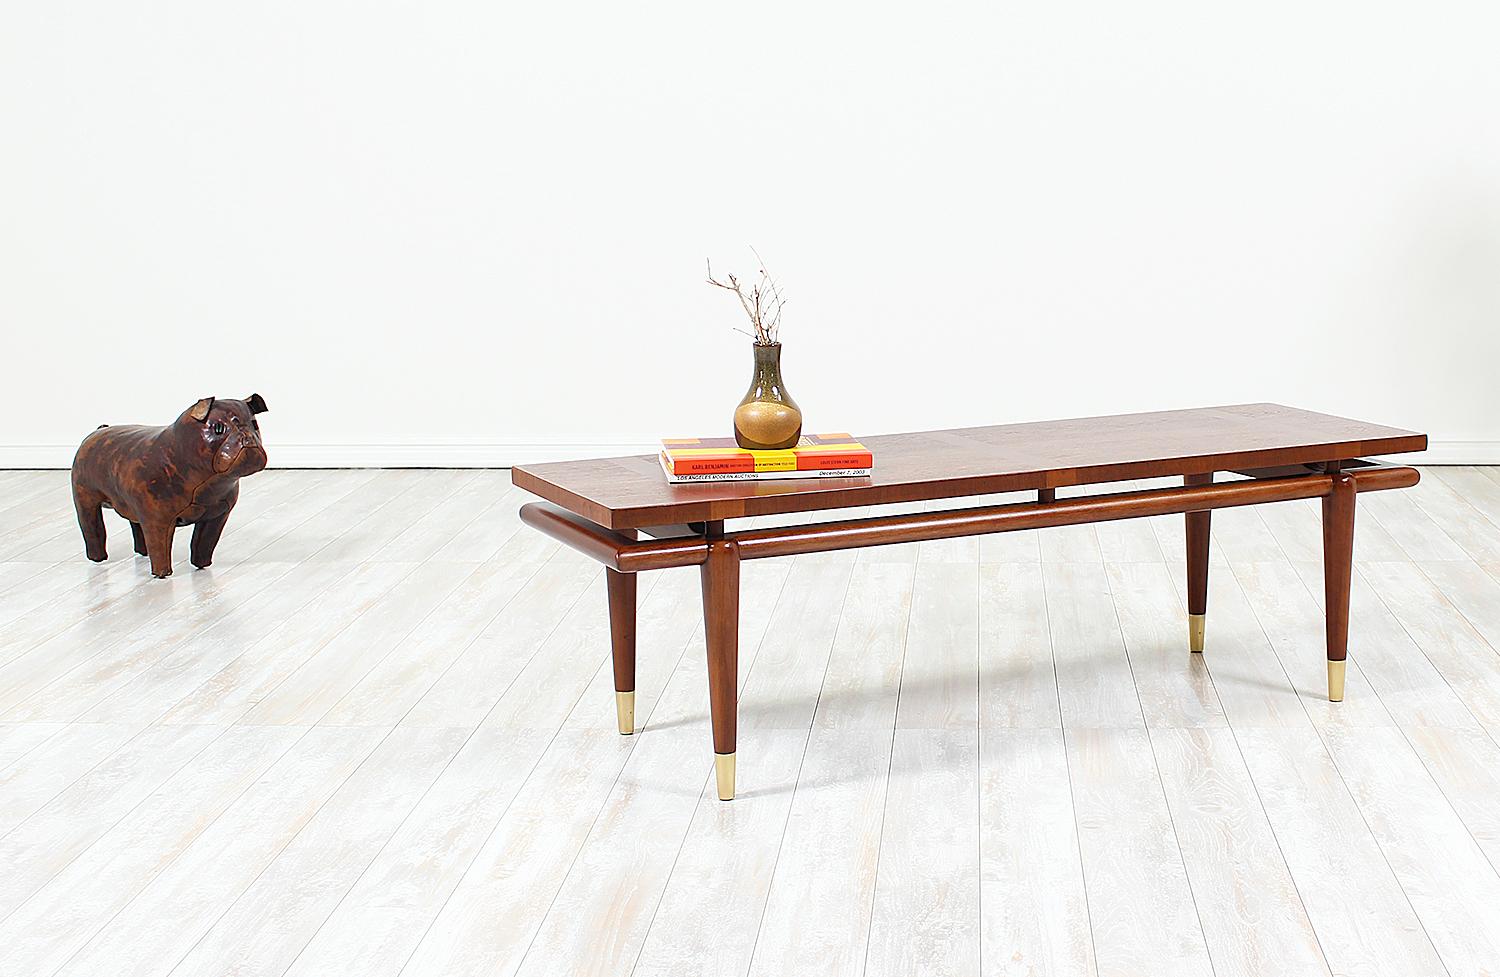 Unique mid-century coffee table designed by John Widdicomb and manufactured by John Widdicomb Co. in the United States circa 1950s. Elegantly crafted in walnut wood, this coffee table features tapered legs that are capped at the feet with brass